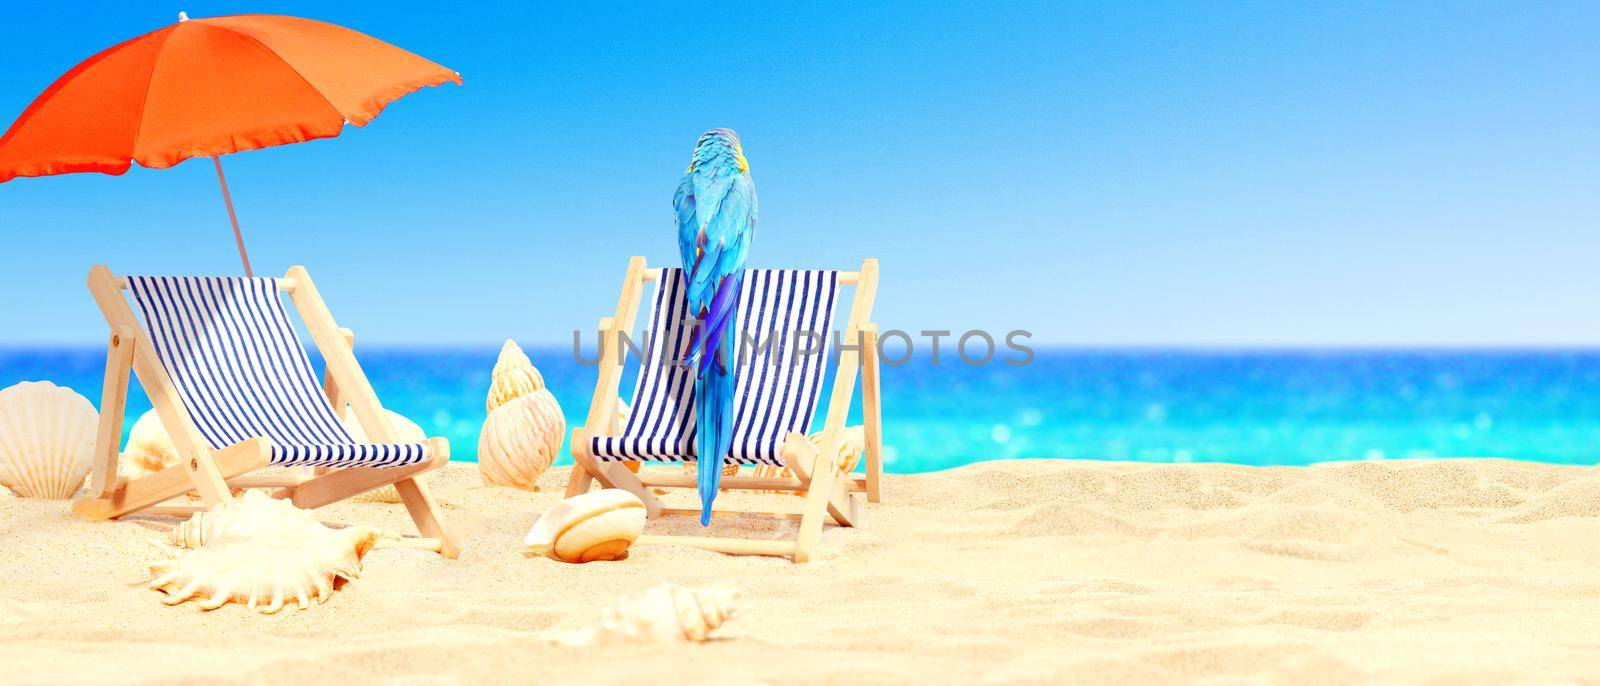 Parrot on tropical beach in the sun on deck chairs under umbrella. by Taut